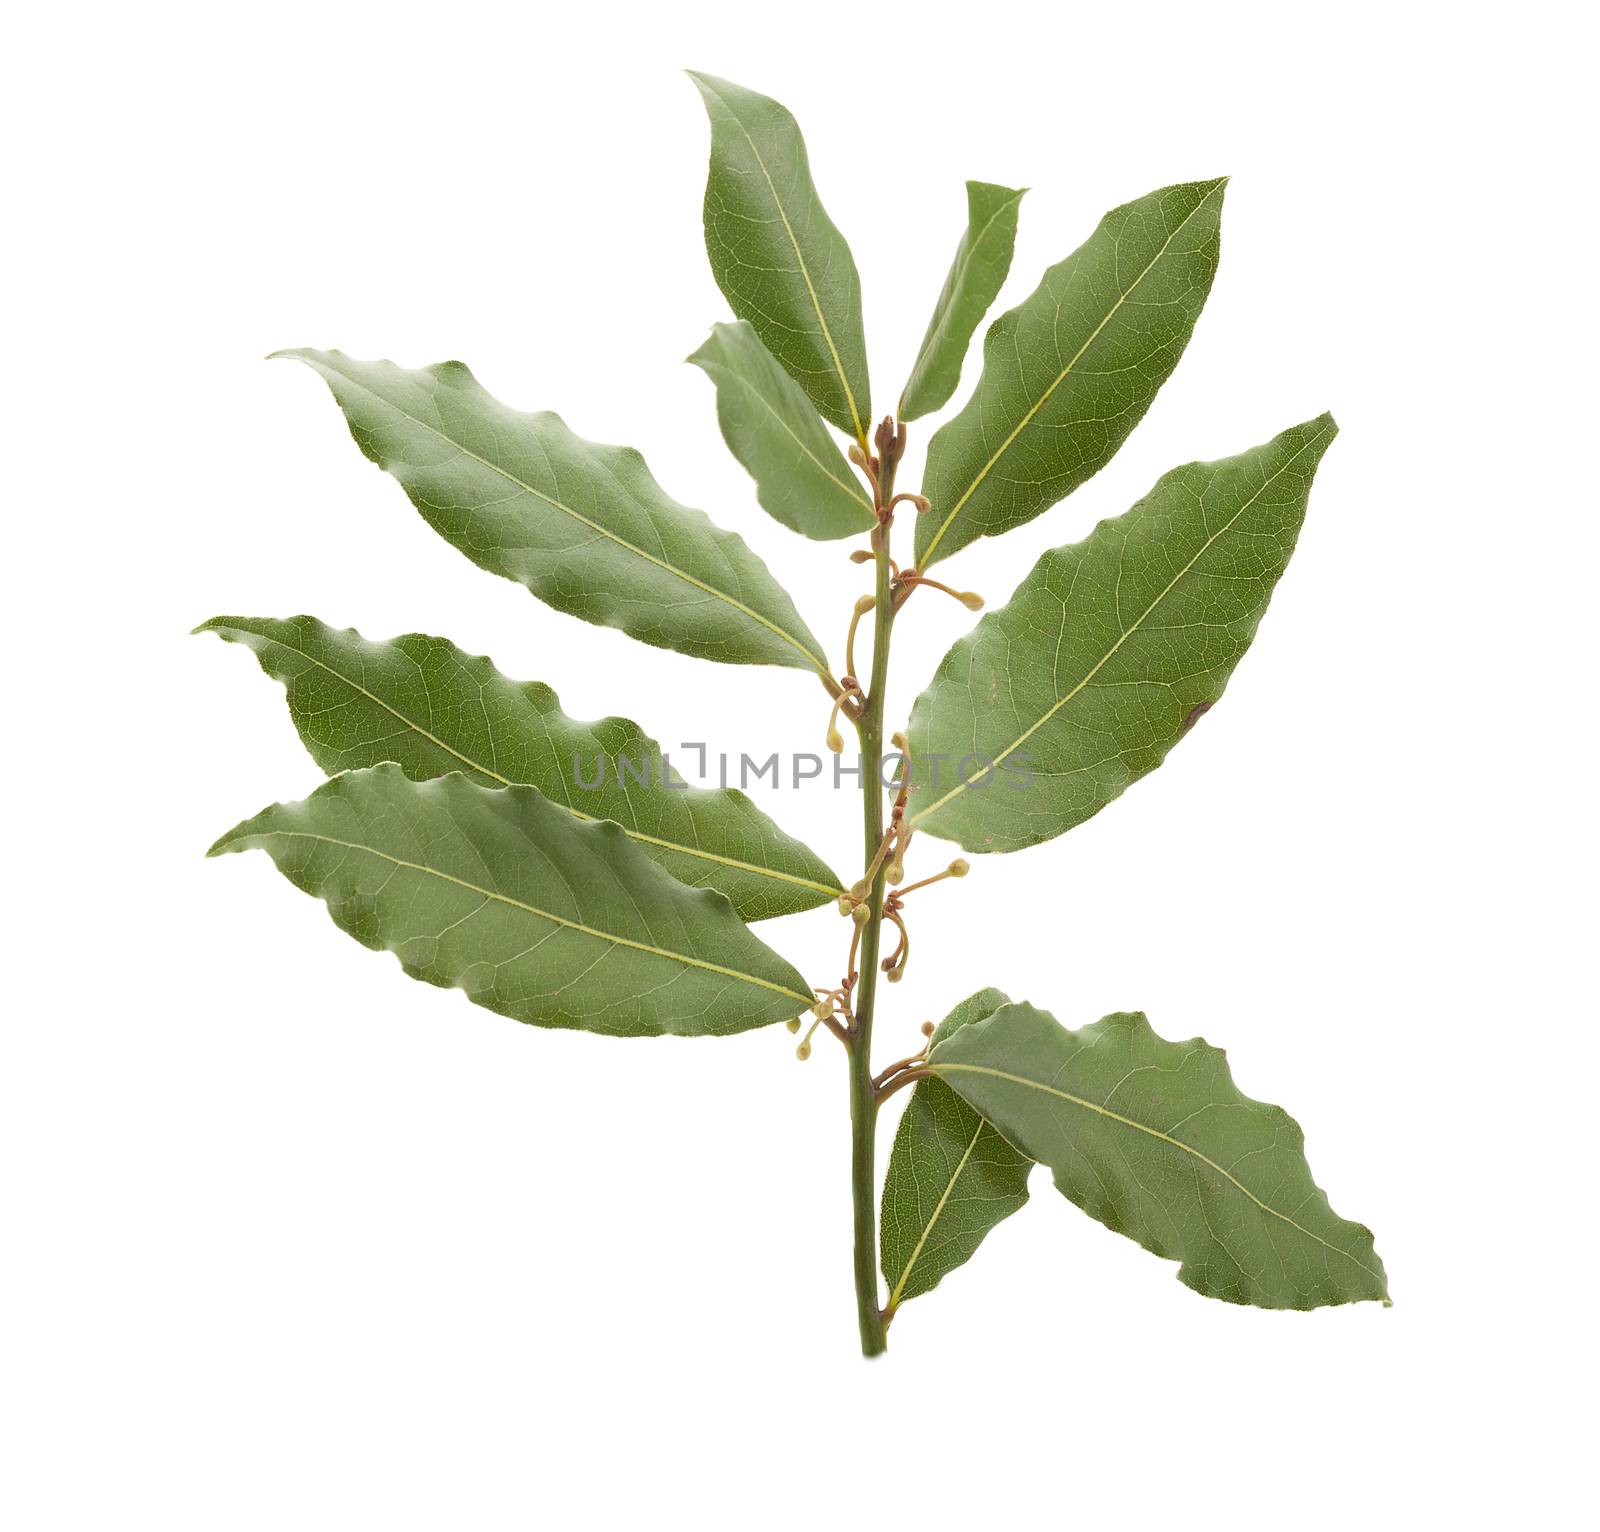 Branch of bay leaf by Angorius